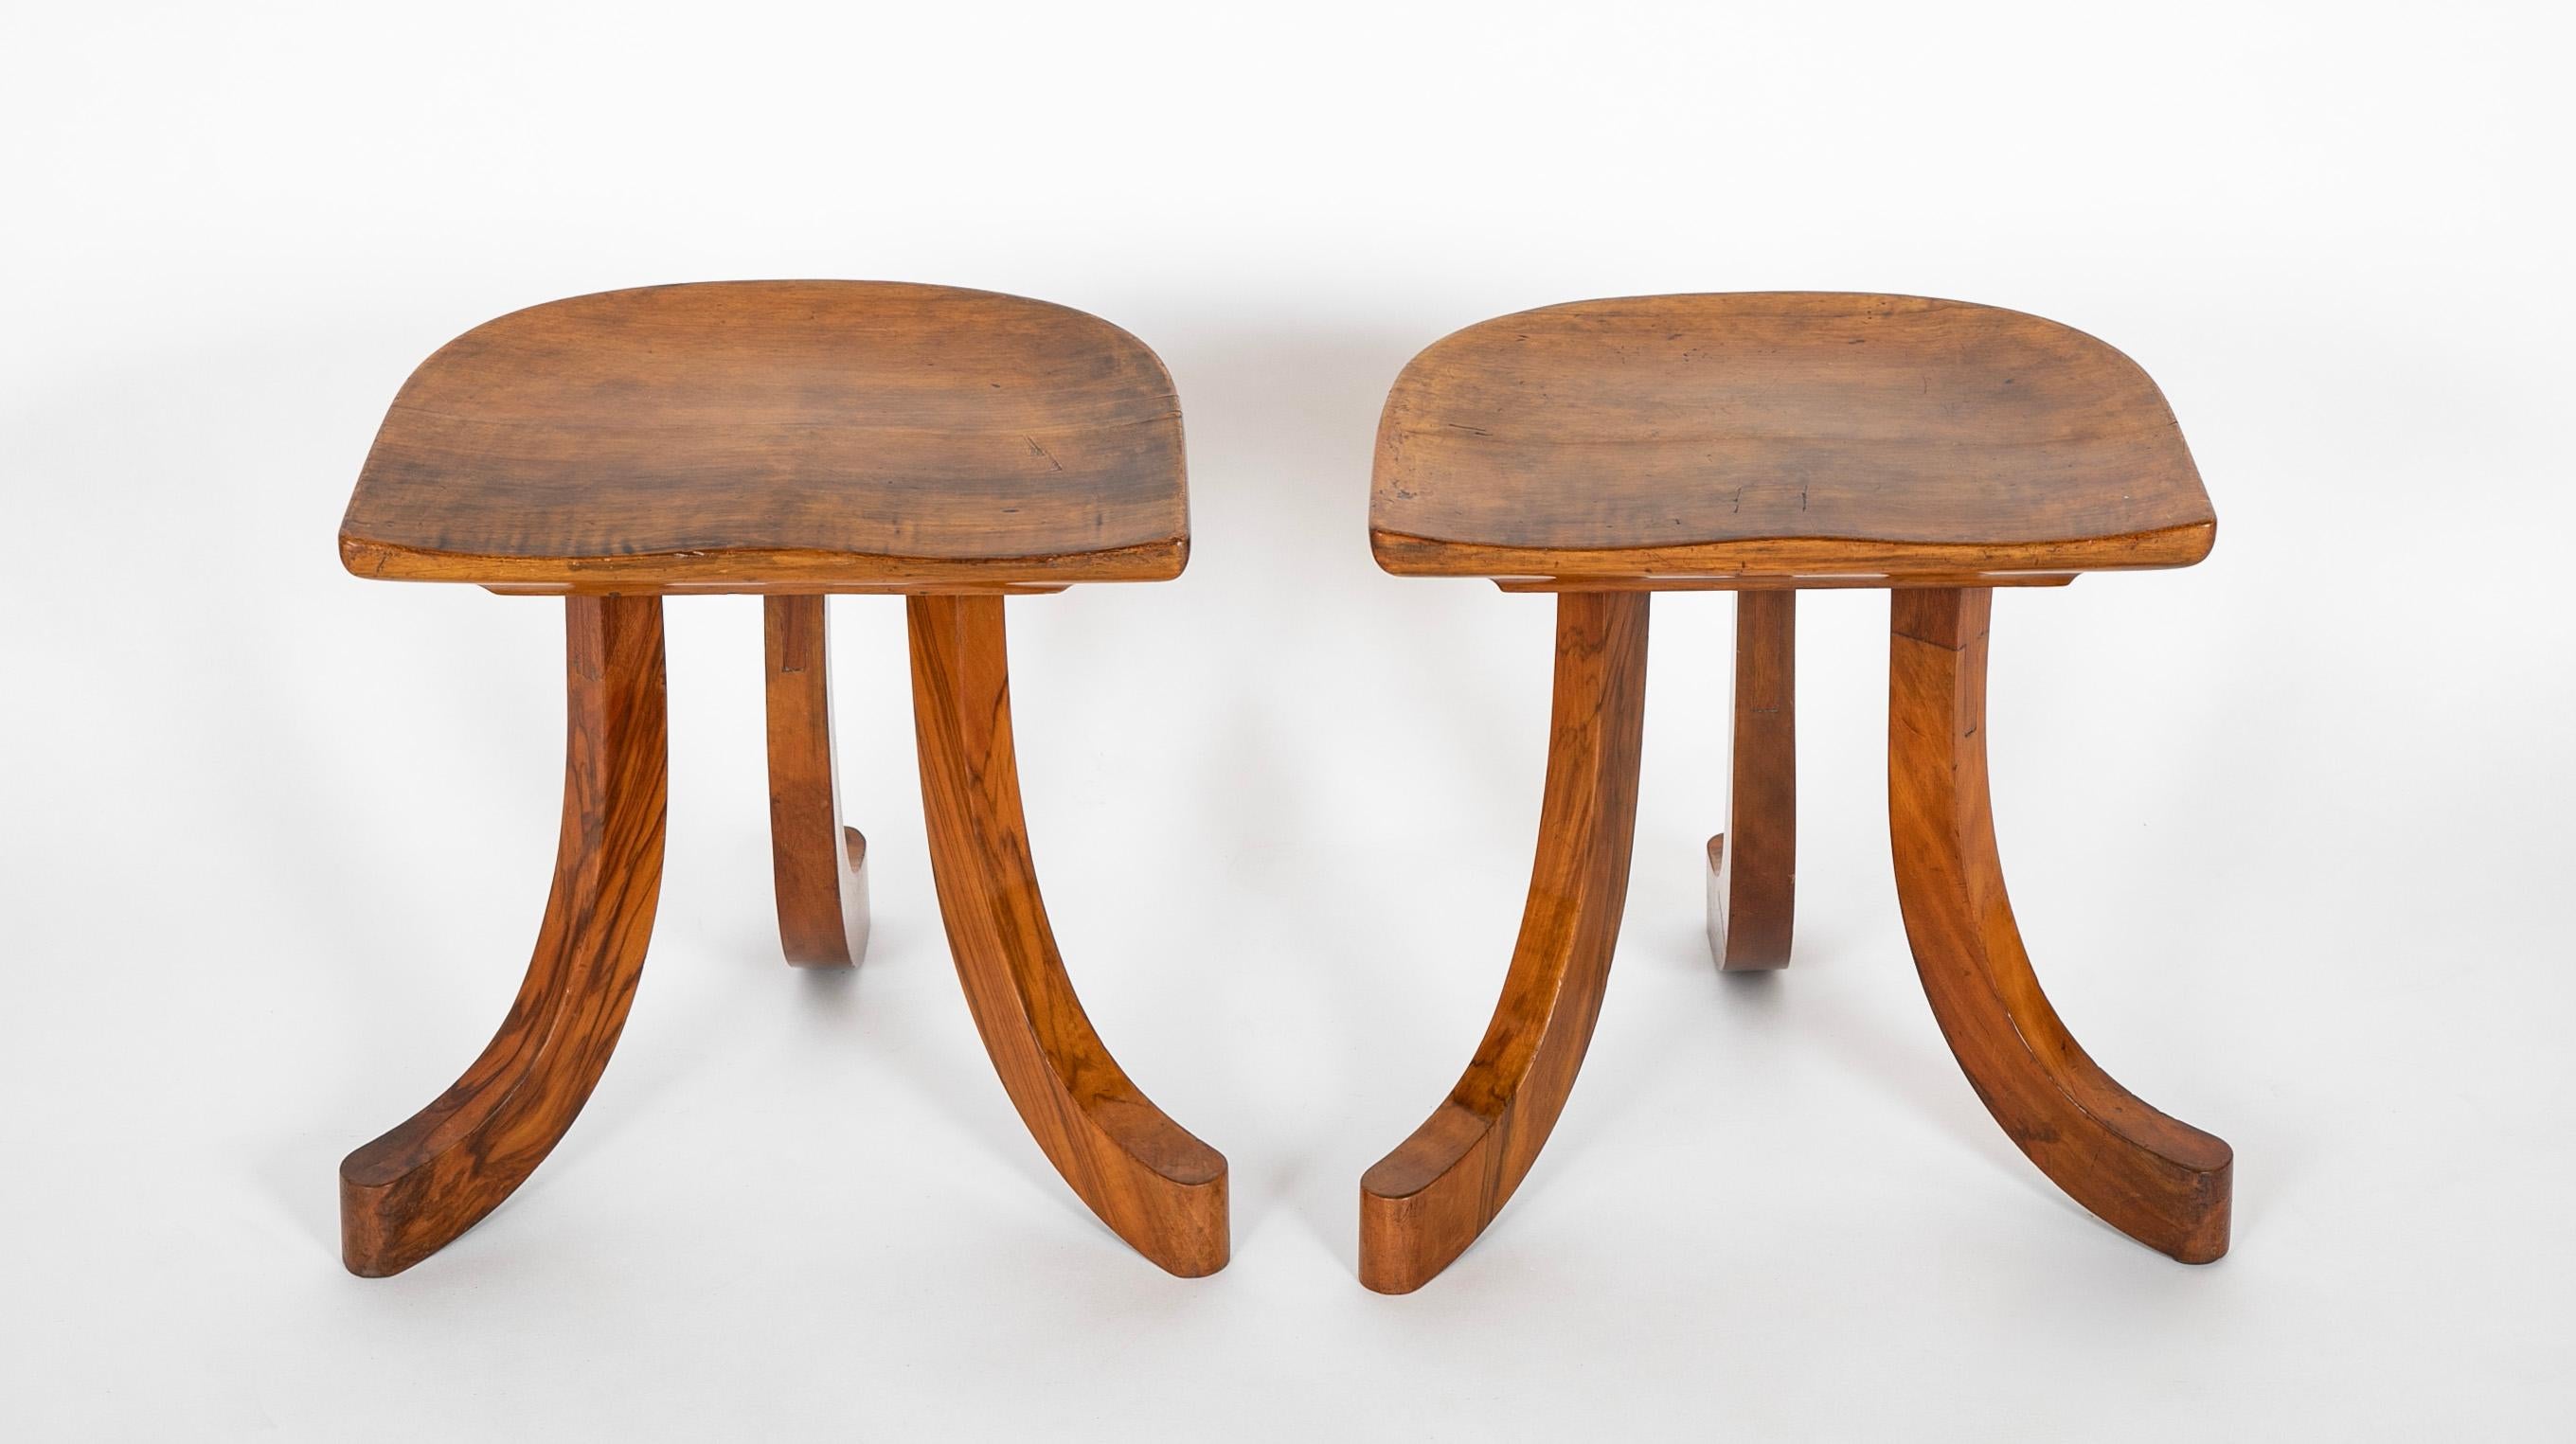 Egyptian Revival Pair of Walnut Tripod Thebes Stools in the Manner of Liberty & Co. For Sale